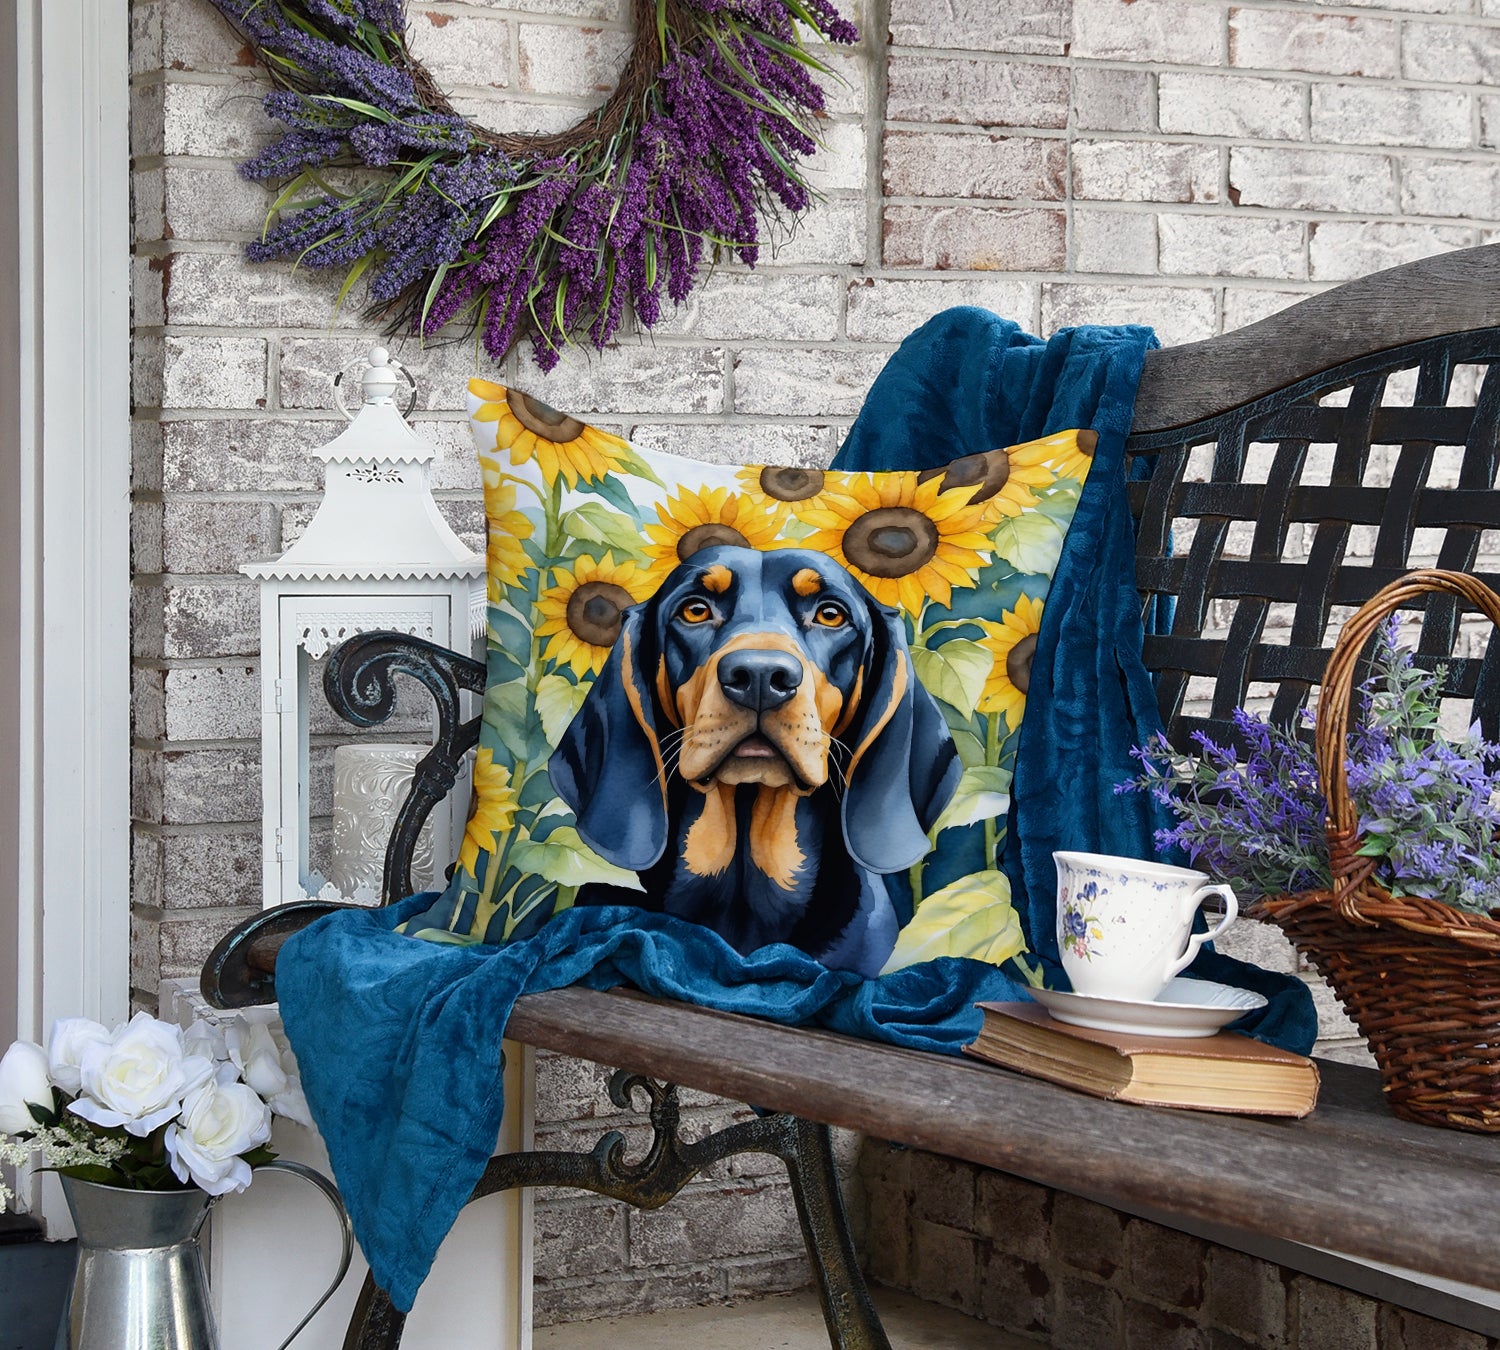 Black and Tan Coonhound in Sunflowers Throw Pillow